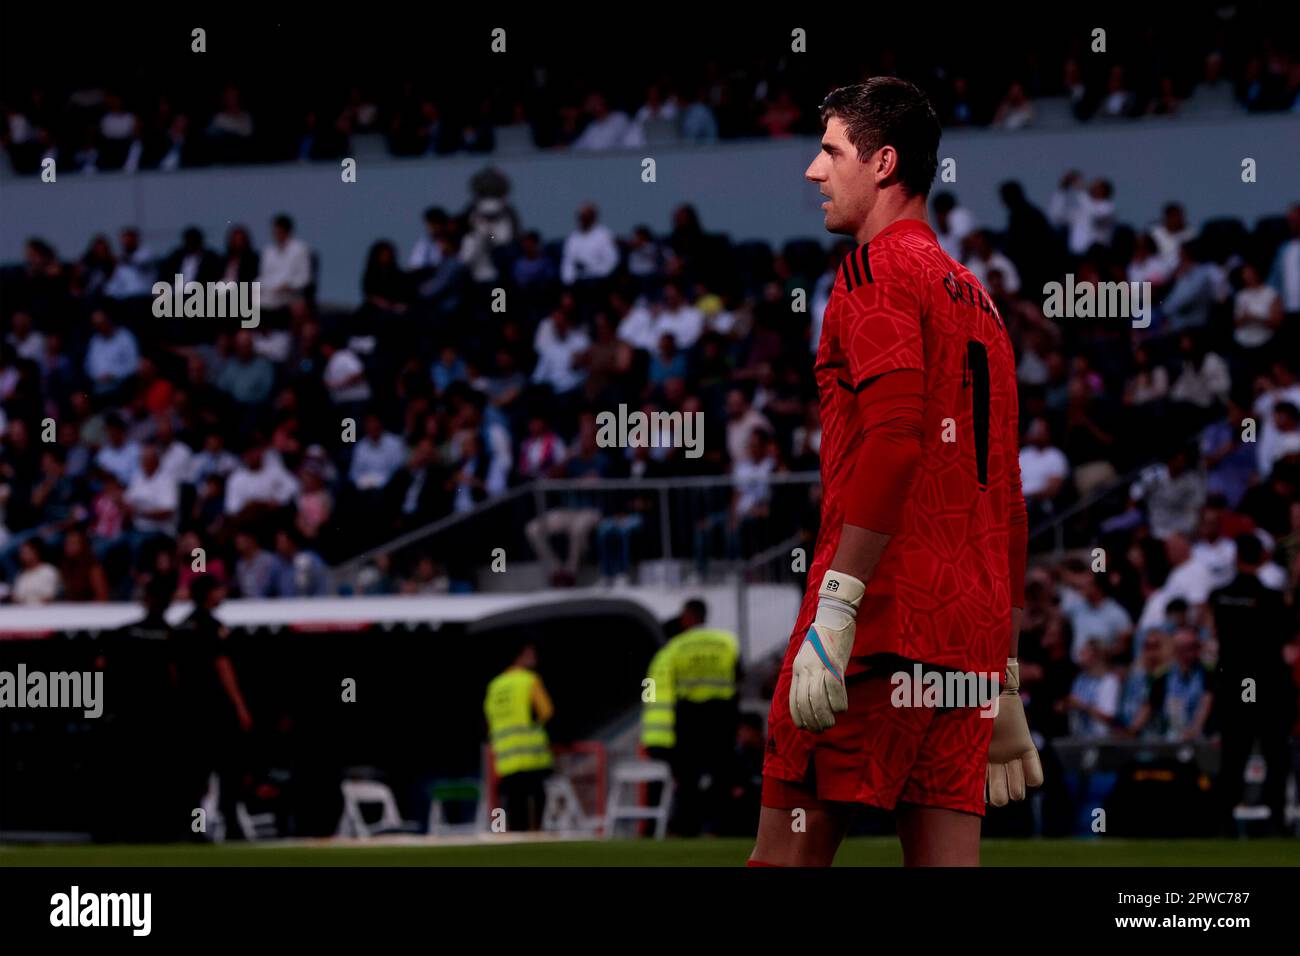 Madrid, Spain. 29th Apr, 2023. Madrid, Spain, 29.04.2023.- Real Madrid goalkeeper Courtais Real Madrid vs Almeria match of the Spanish Soccer League on matchday 32 held at the Santiago Bernabeu Stadium in the capital of the Kingdom of Spain. Final result 4-2. Real Madrid goals from Benzema 2 ,17 , 42 (P), Rodrygo 47 . Goals from Almeria Lazaro Vinicius 40' 5, and Lucas Robertone 61' Credit: Juan Carlos Rojas/dpa/Alamy Live News Stock Photo